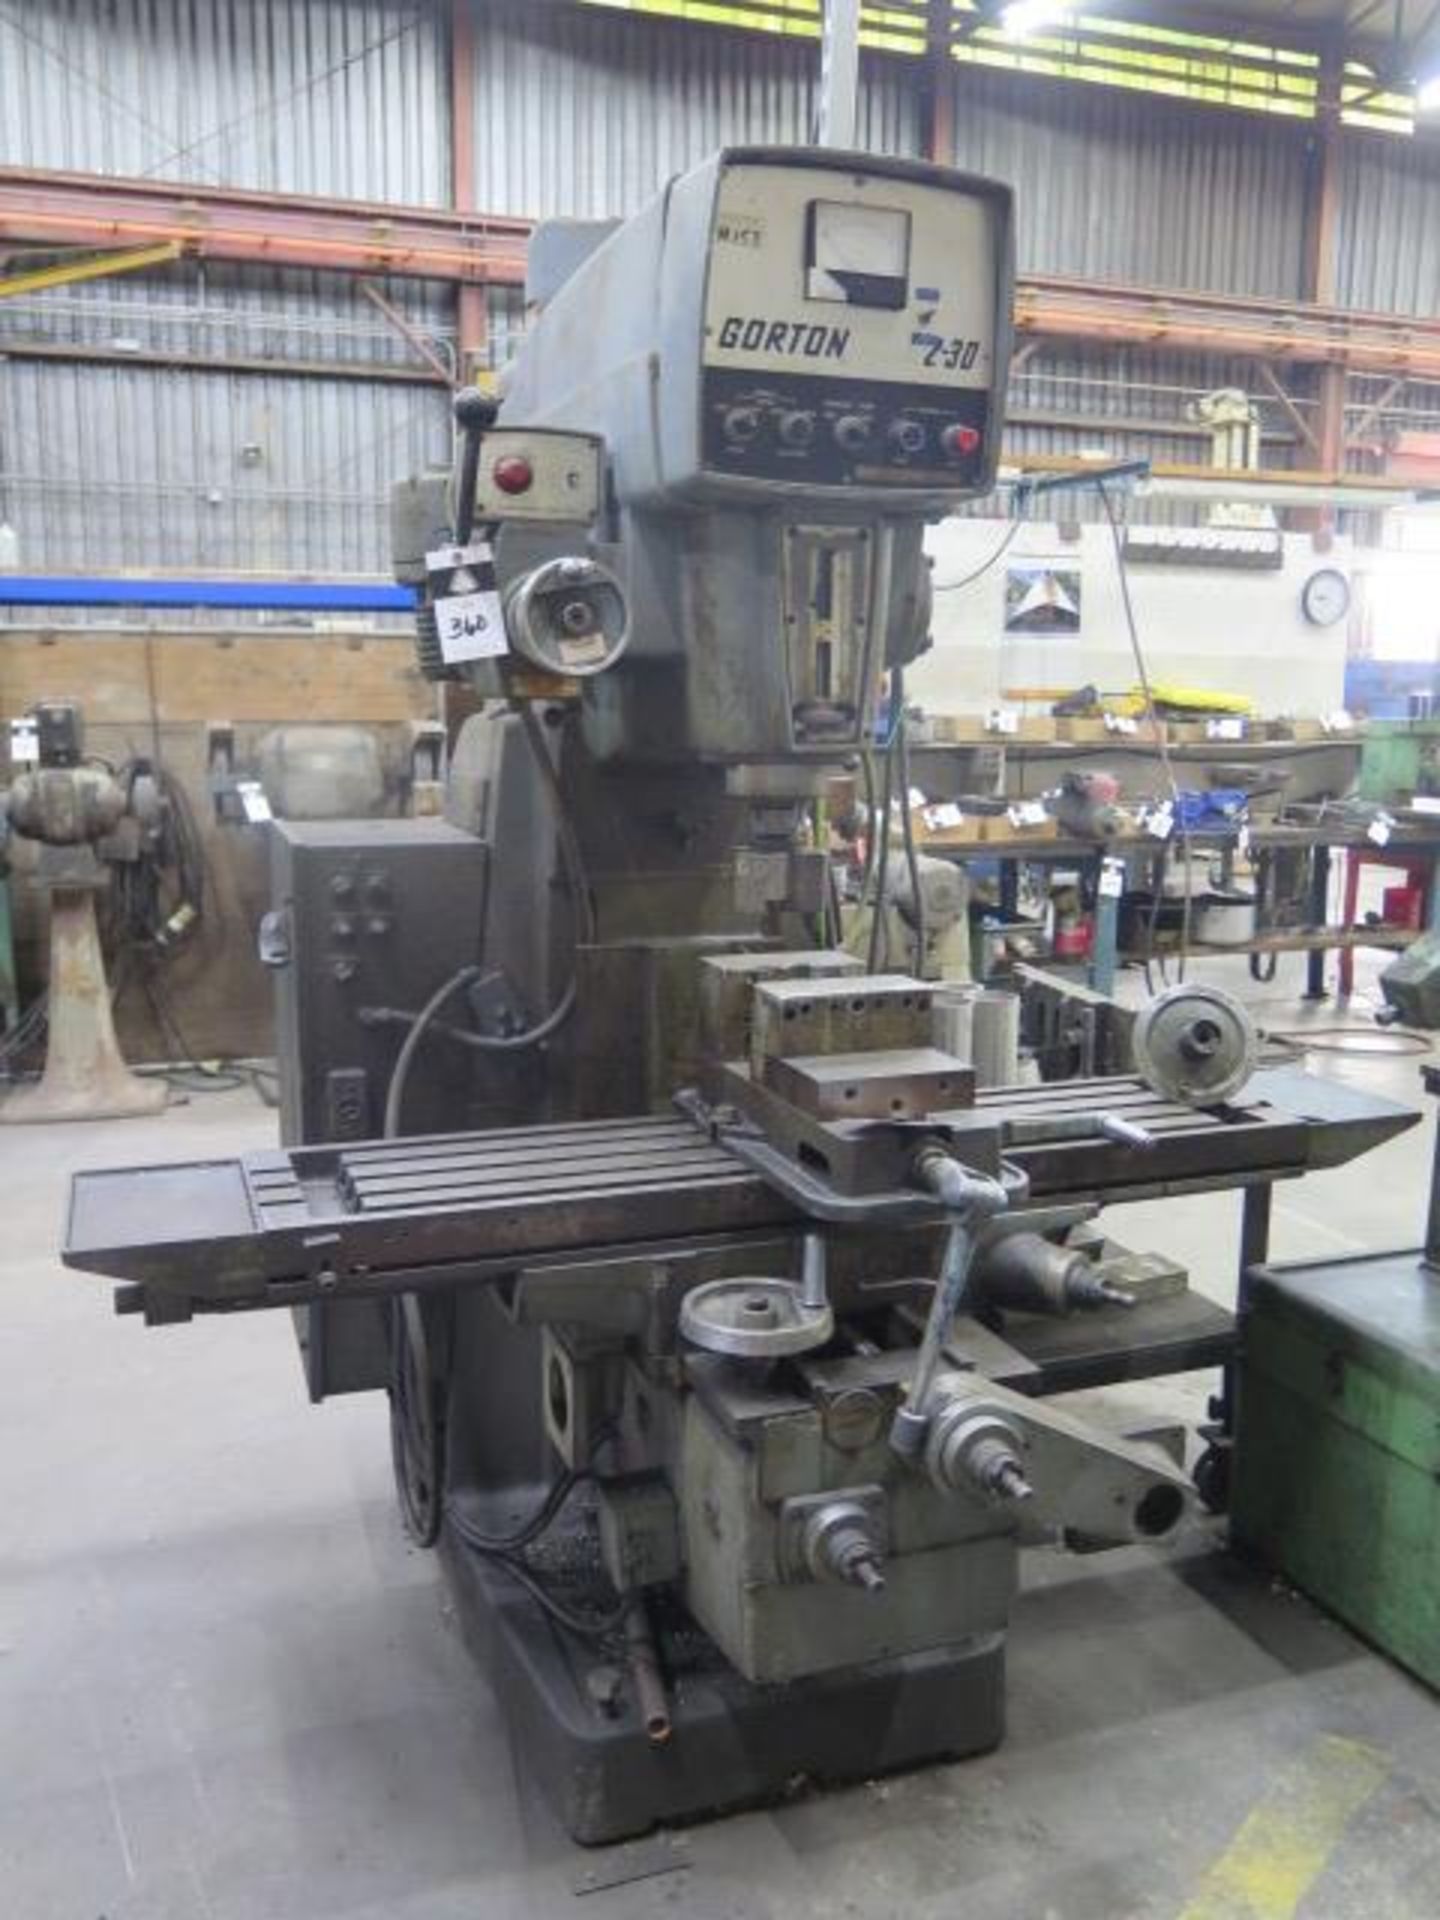 Gorton 2-30 Auto Trace Master Vertical Mill w/ Universal Kwik-Switch Taper Spindle, SOLD AS IS